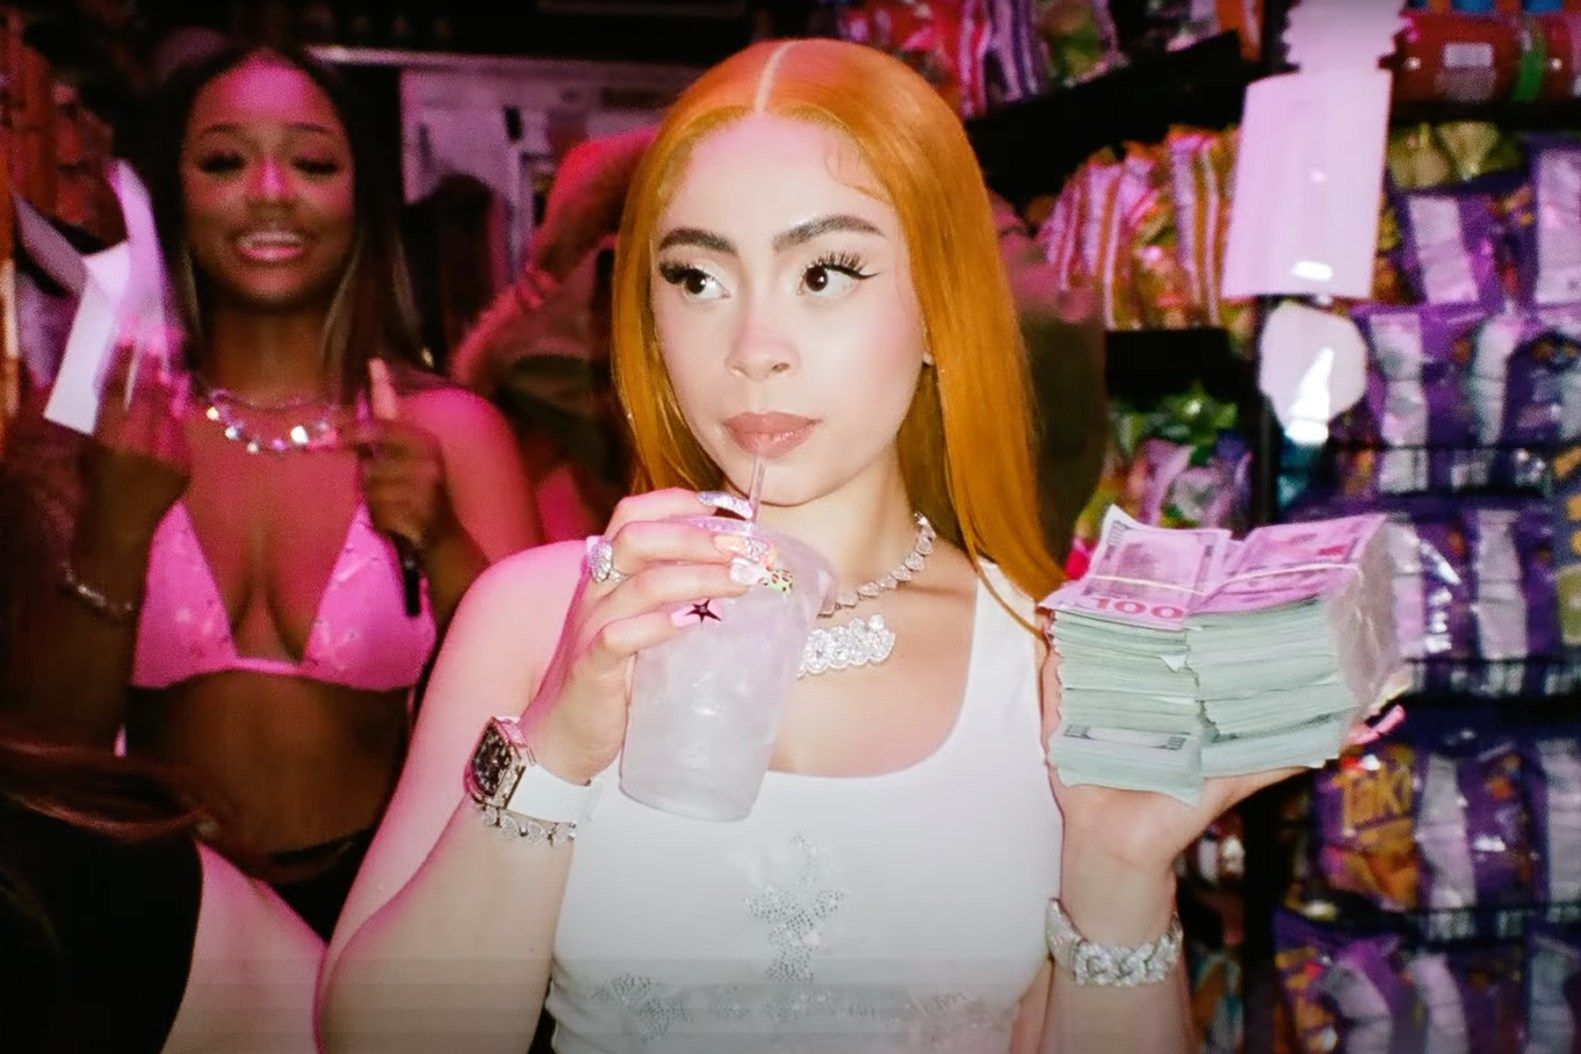 Ice Spice Throws Another Impromptu Bronx Party in 'Deli' Music Video